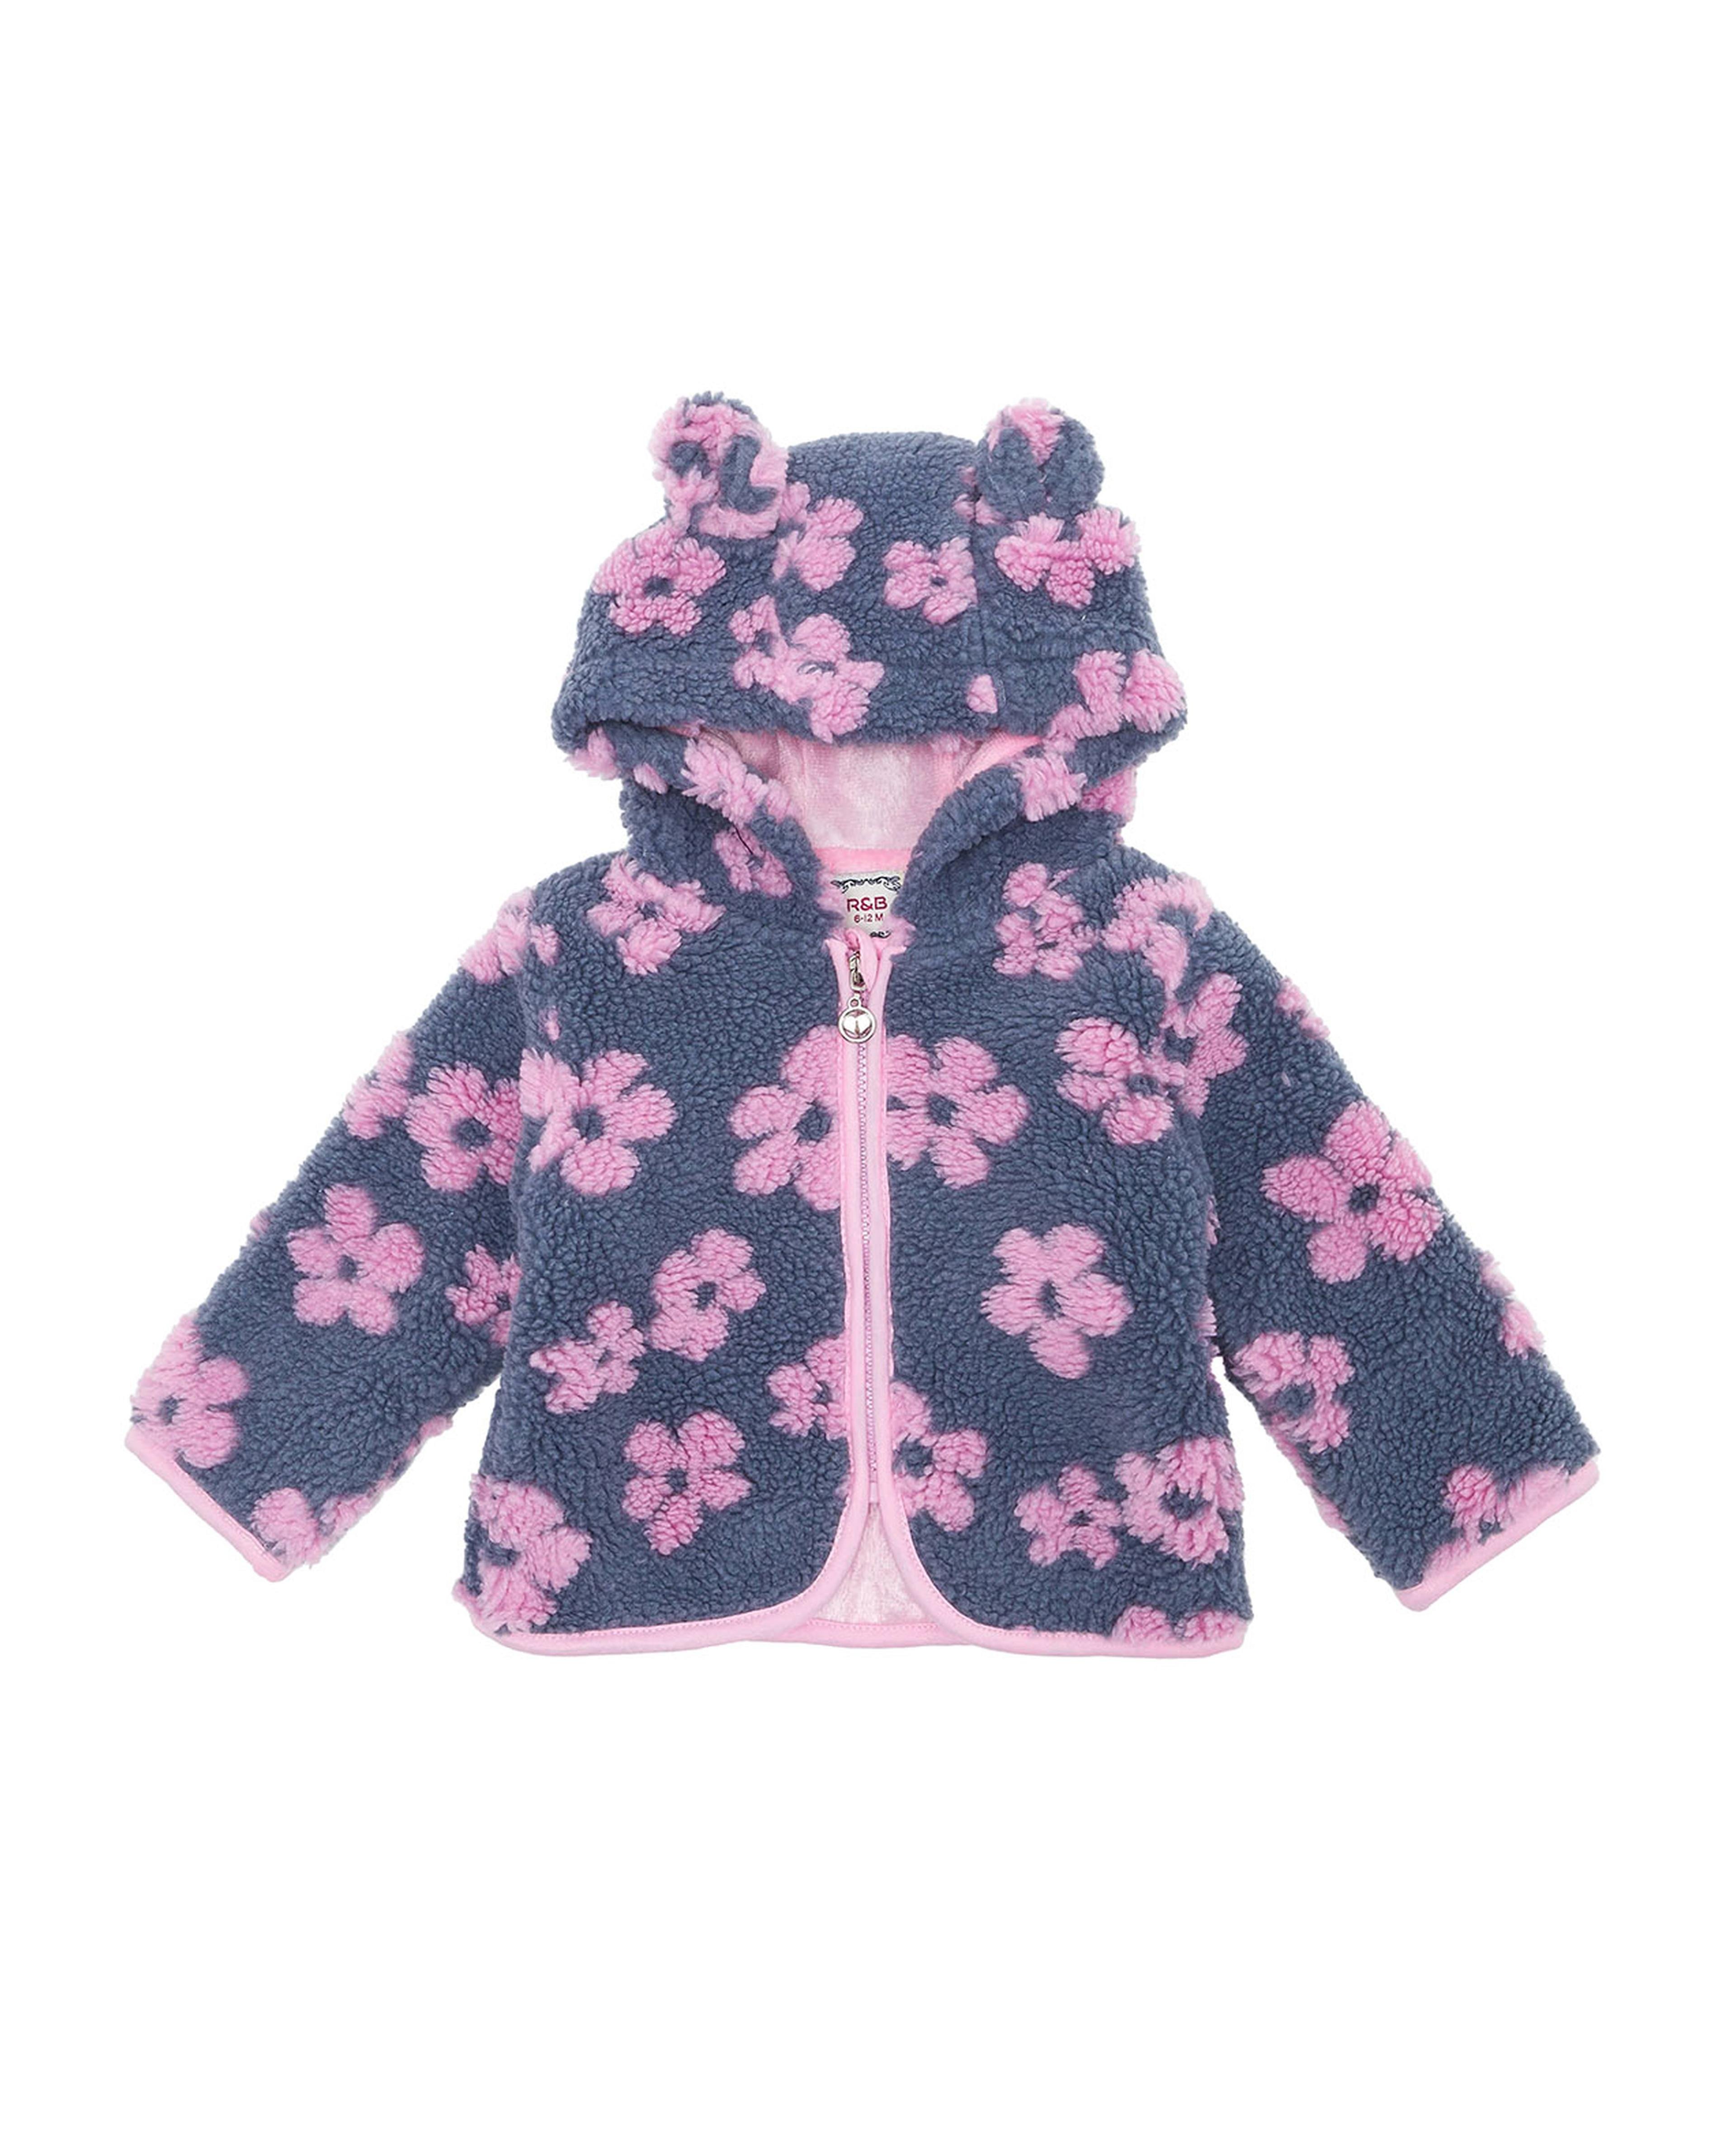 Patterned Hooded Jacket with Zipper Closure